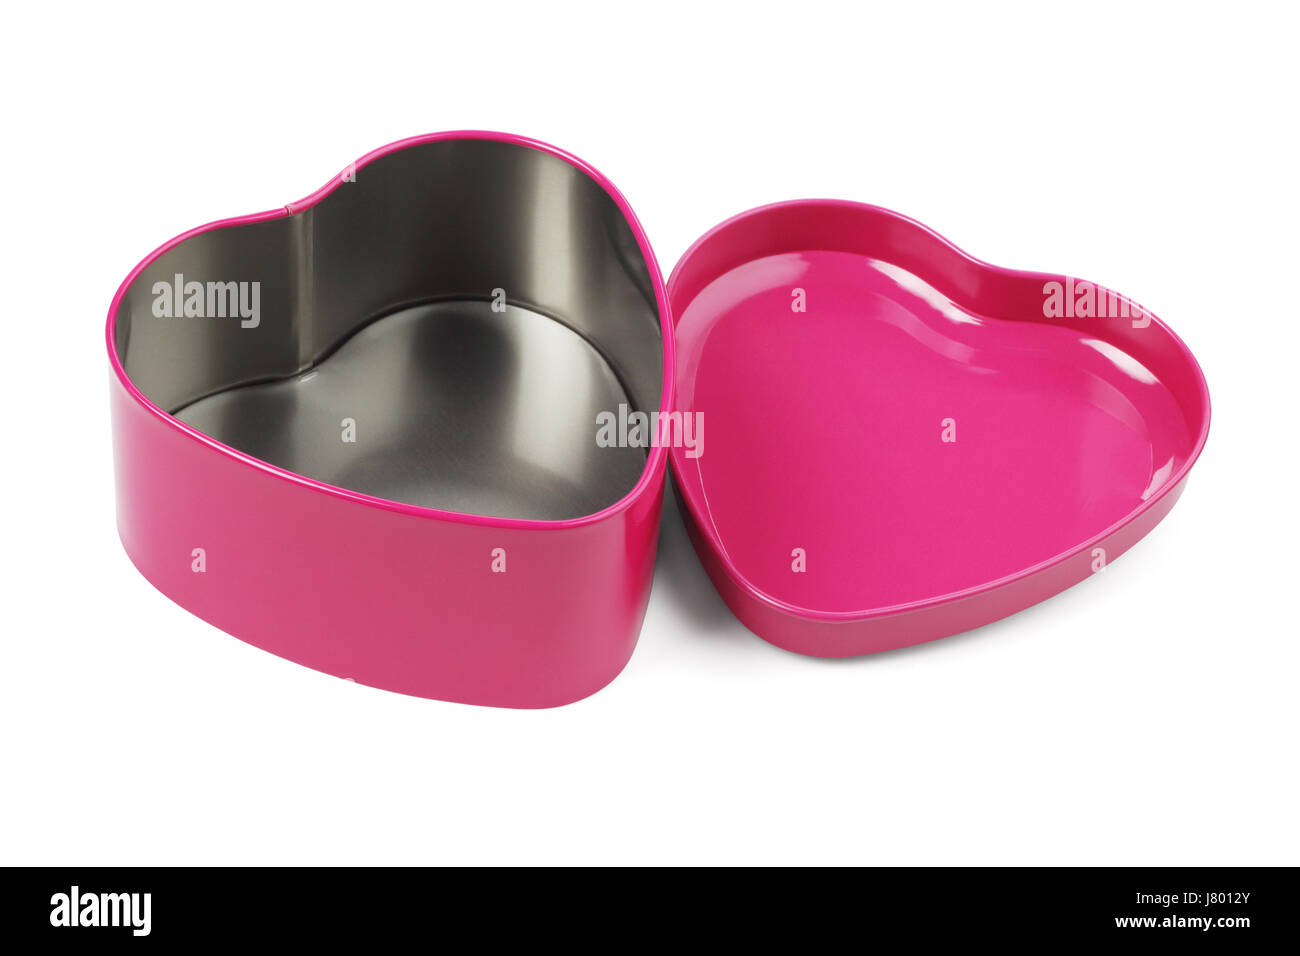 Open Heart Shaped Metal Container on White Background Stock Photo